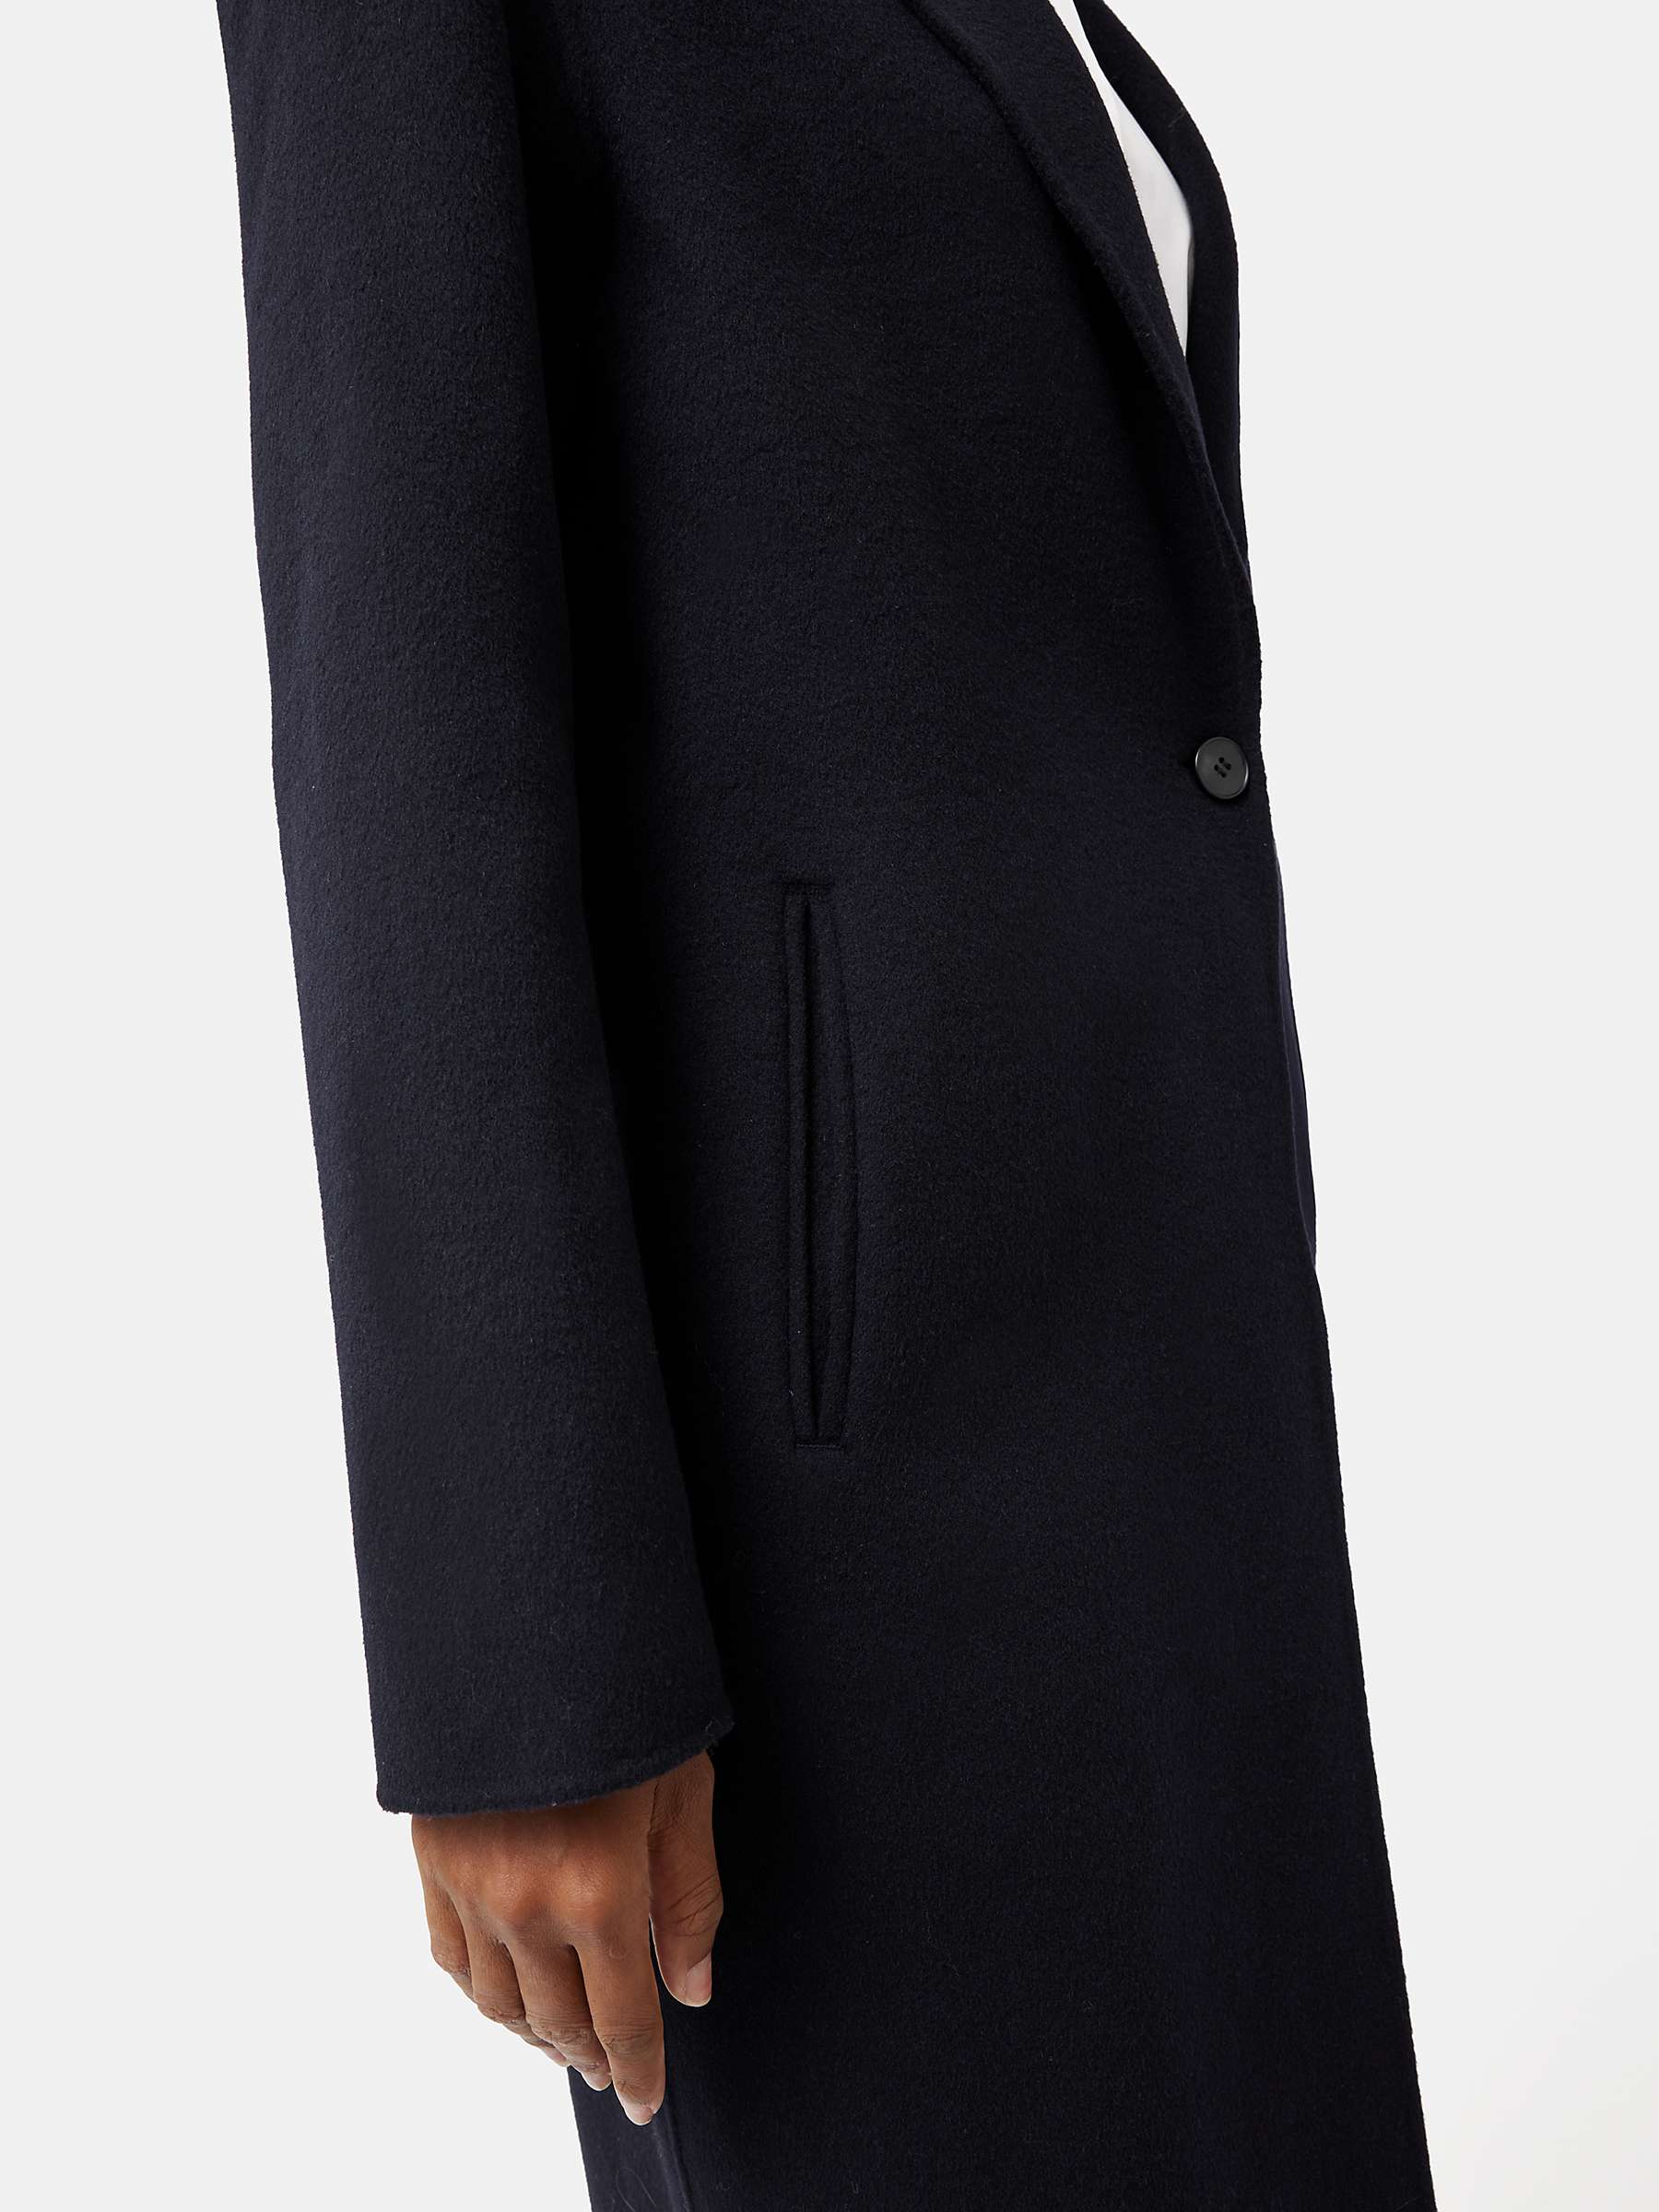 Jigsaw Wool Blend Double Faced Crombie Coat, Navy at John Lewis & Partners